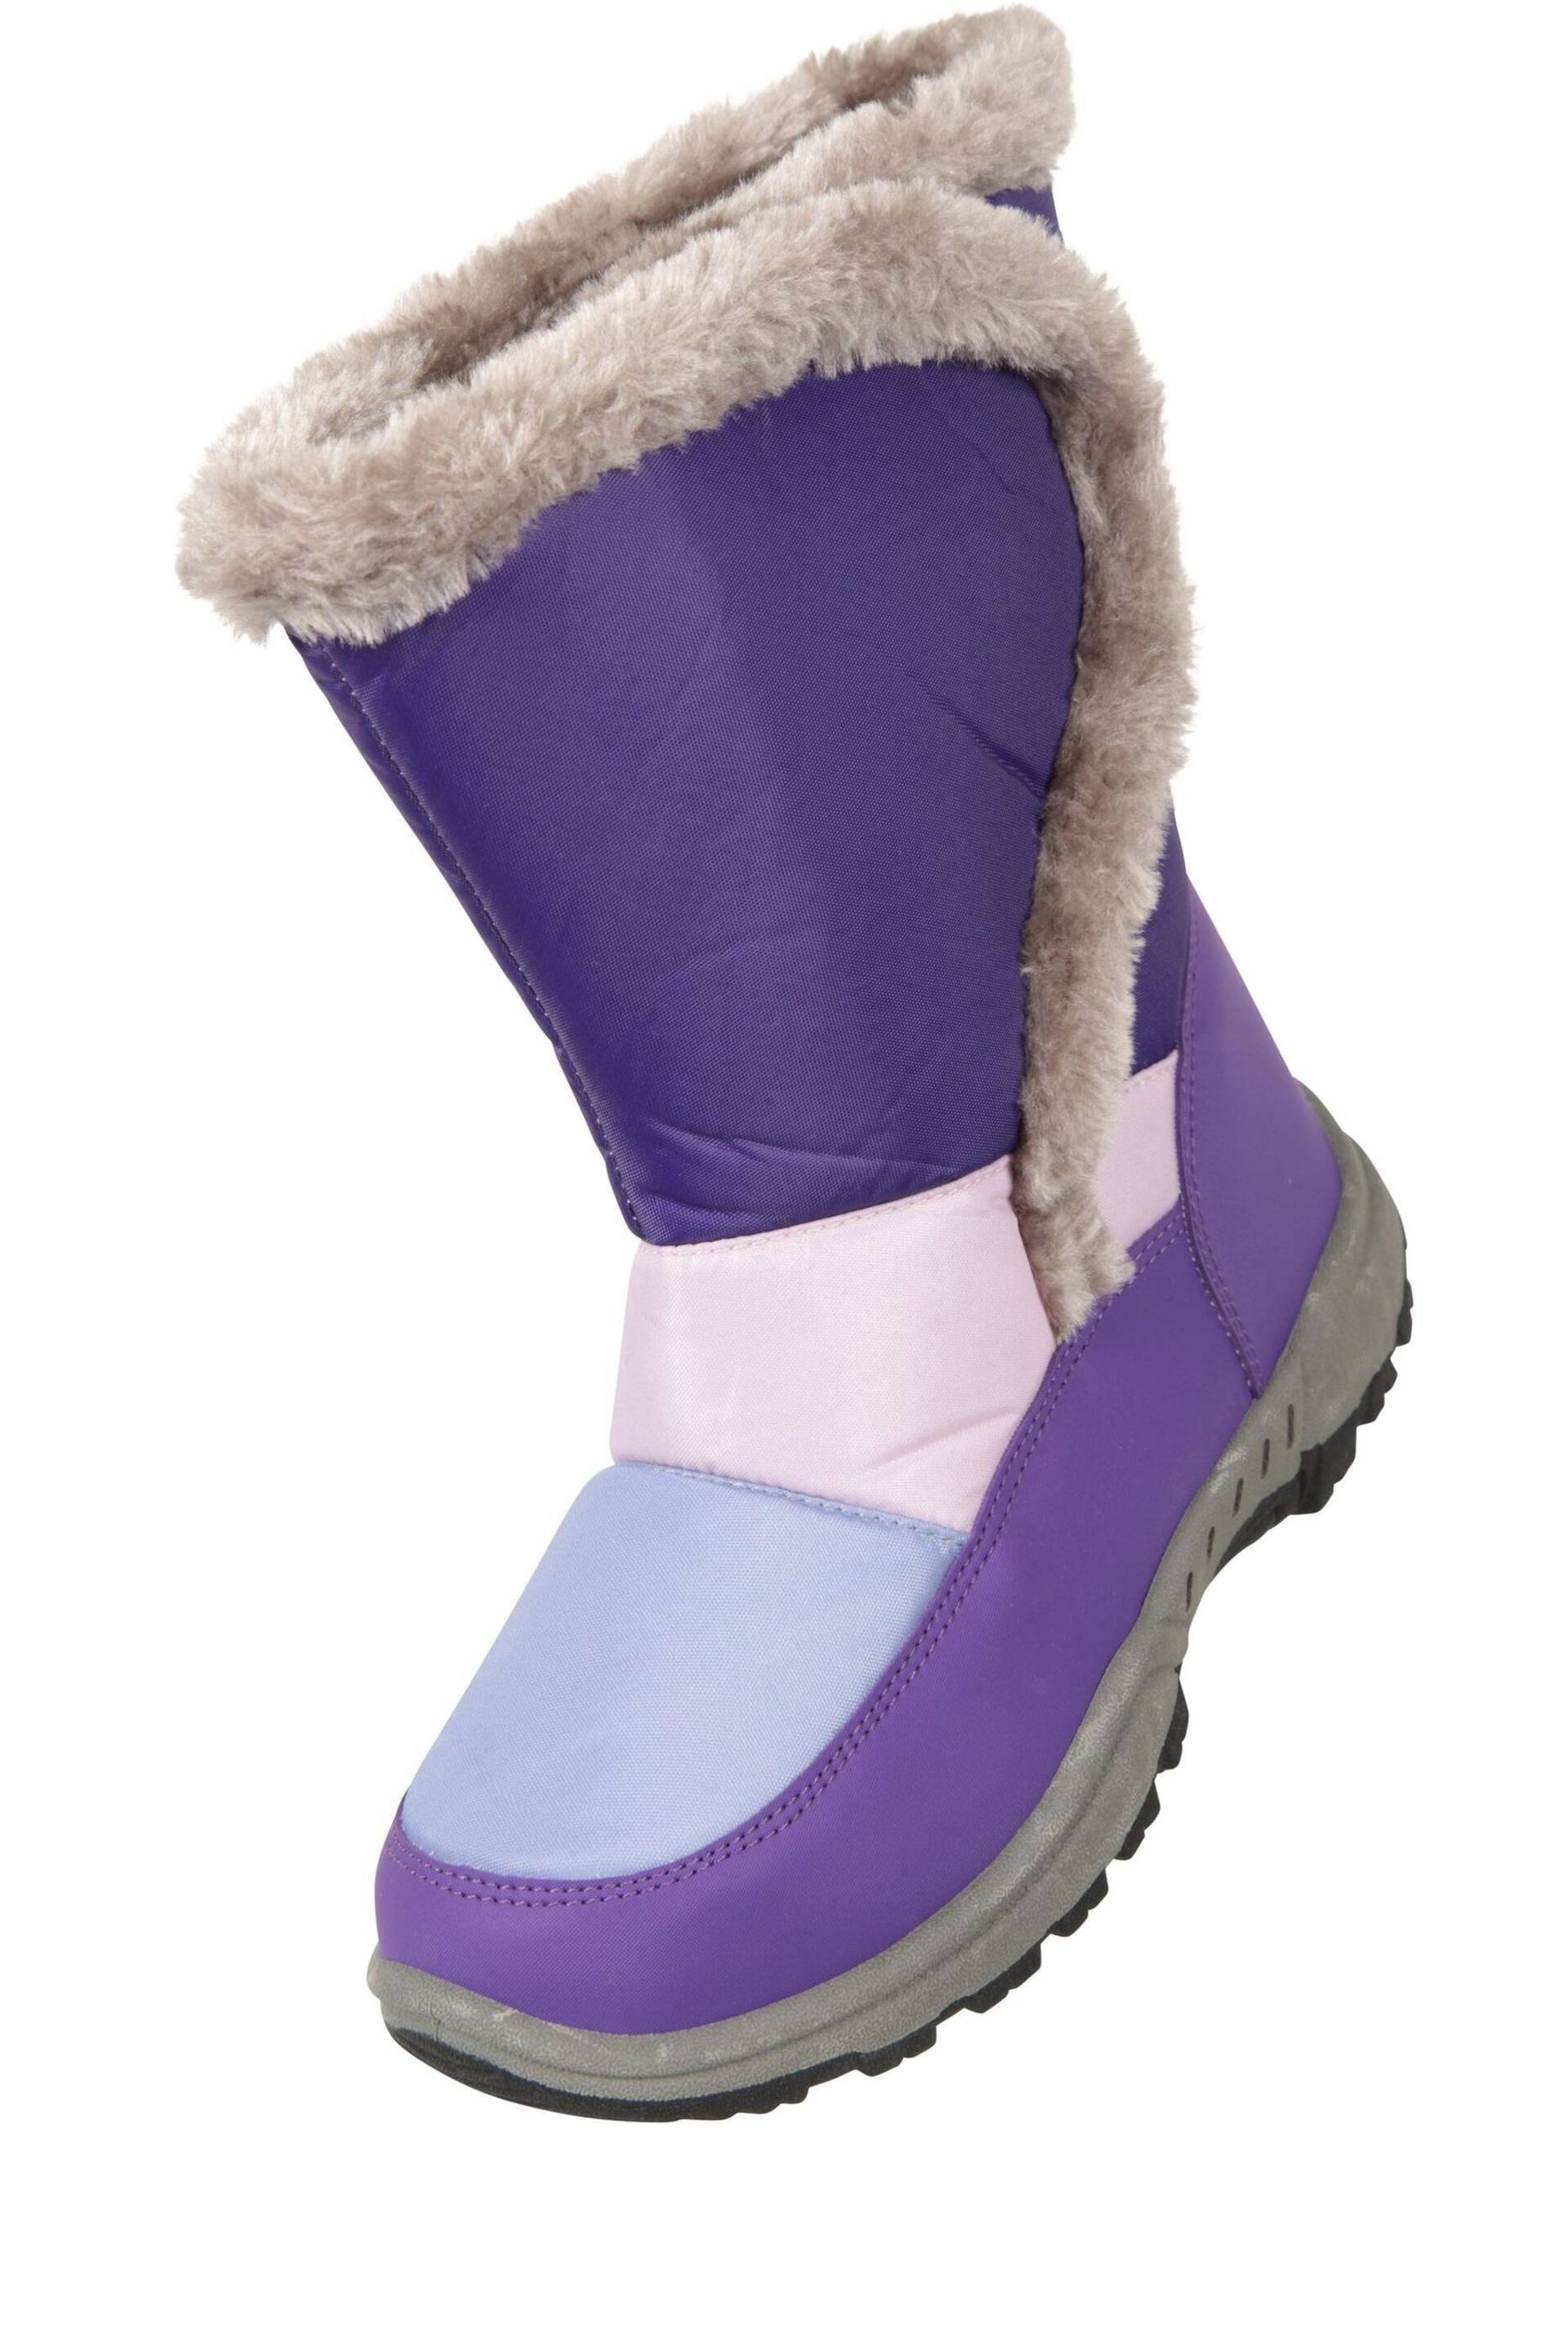 Mountain Warehouse Purple Caribou Kids Faux Fur Trim Sherpa Lined Snow Boots - Image 5 of 6